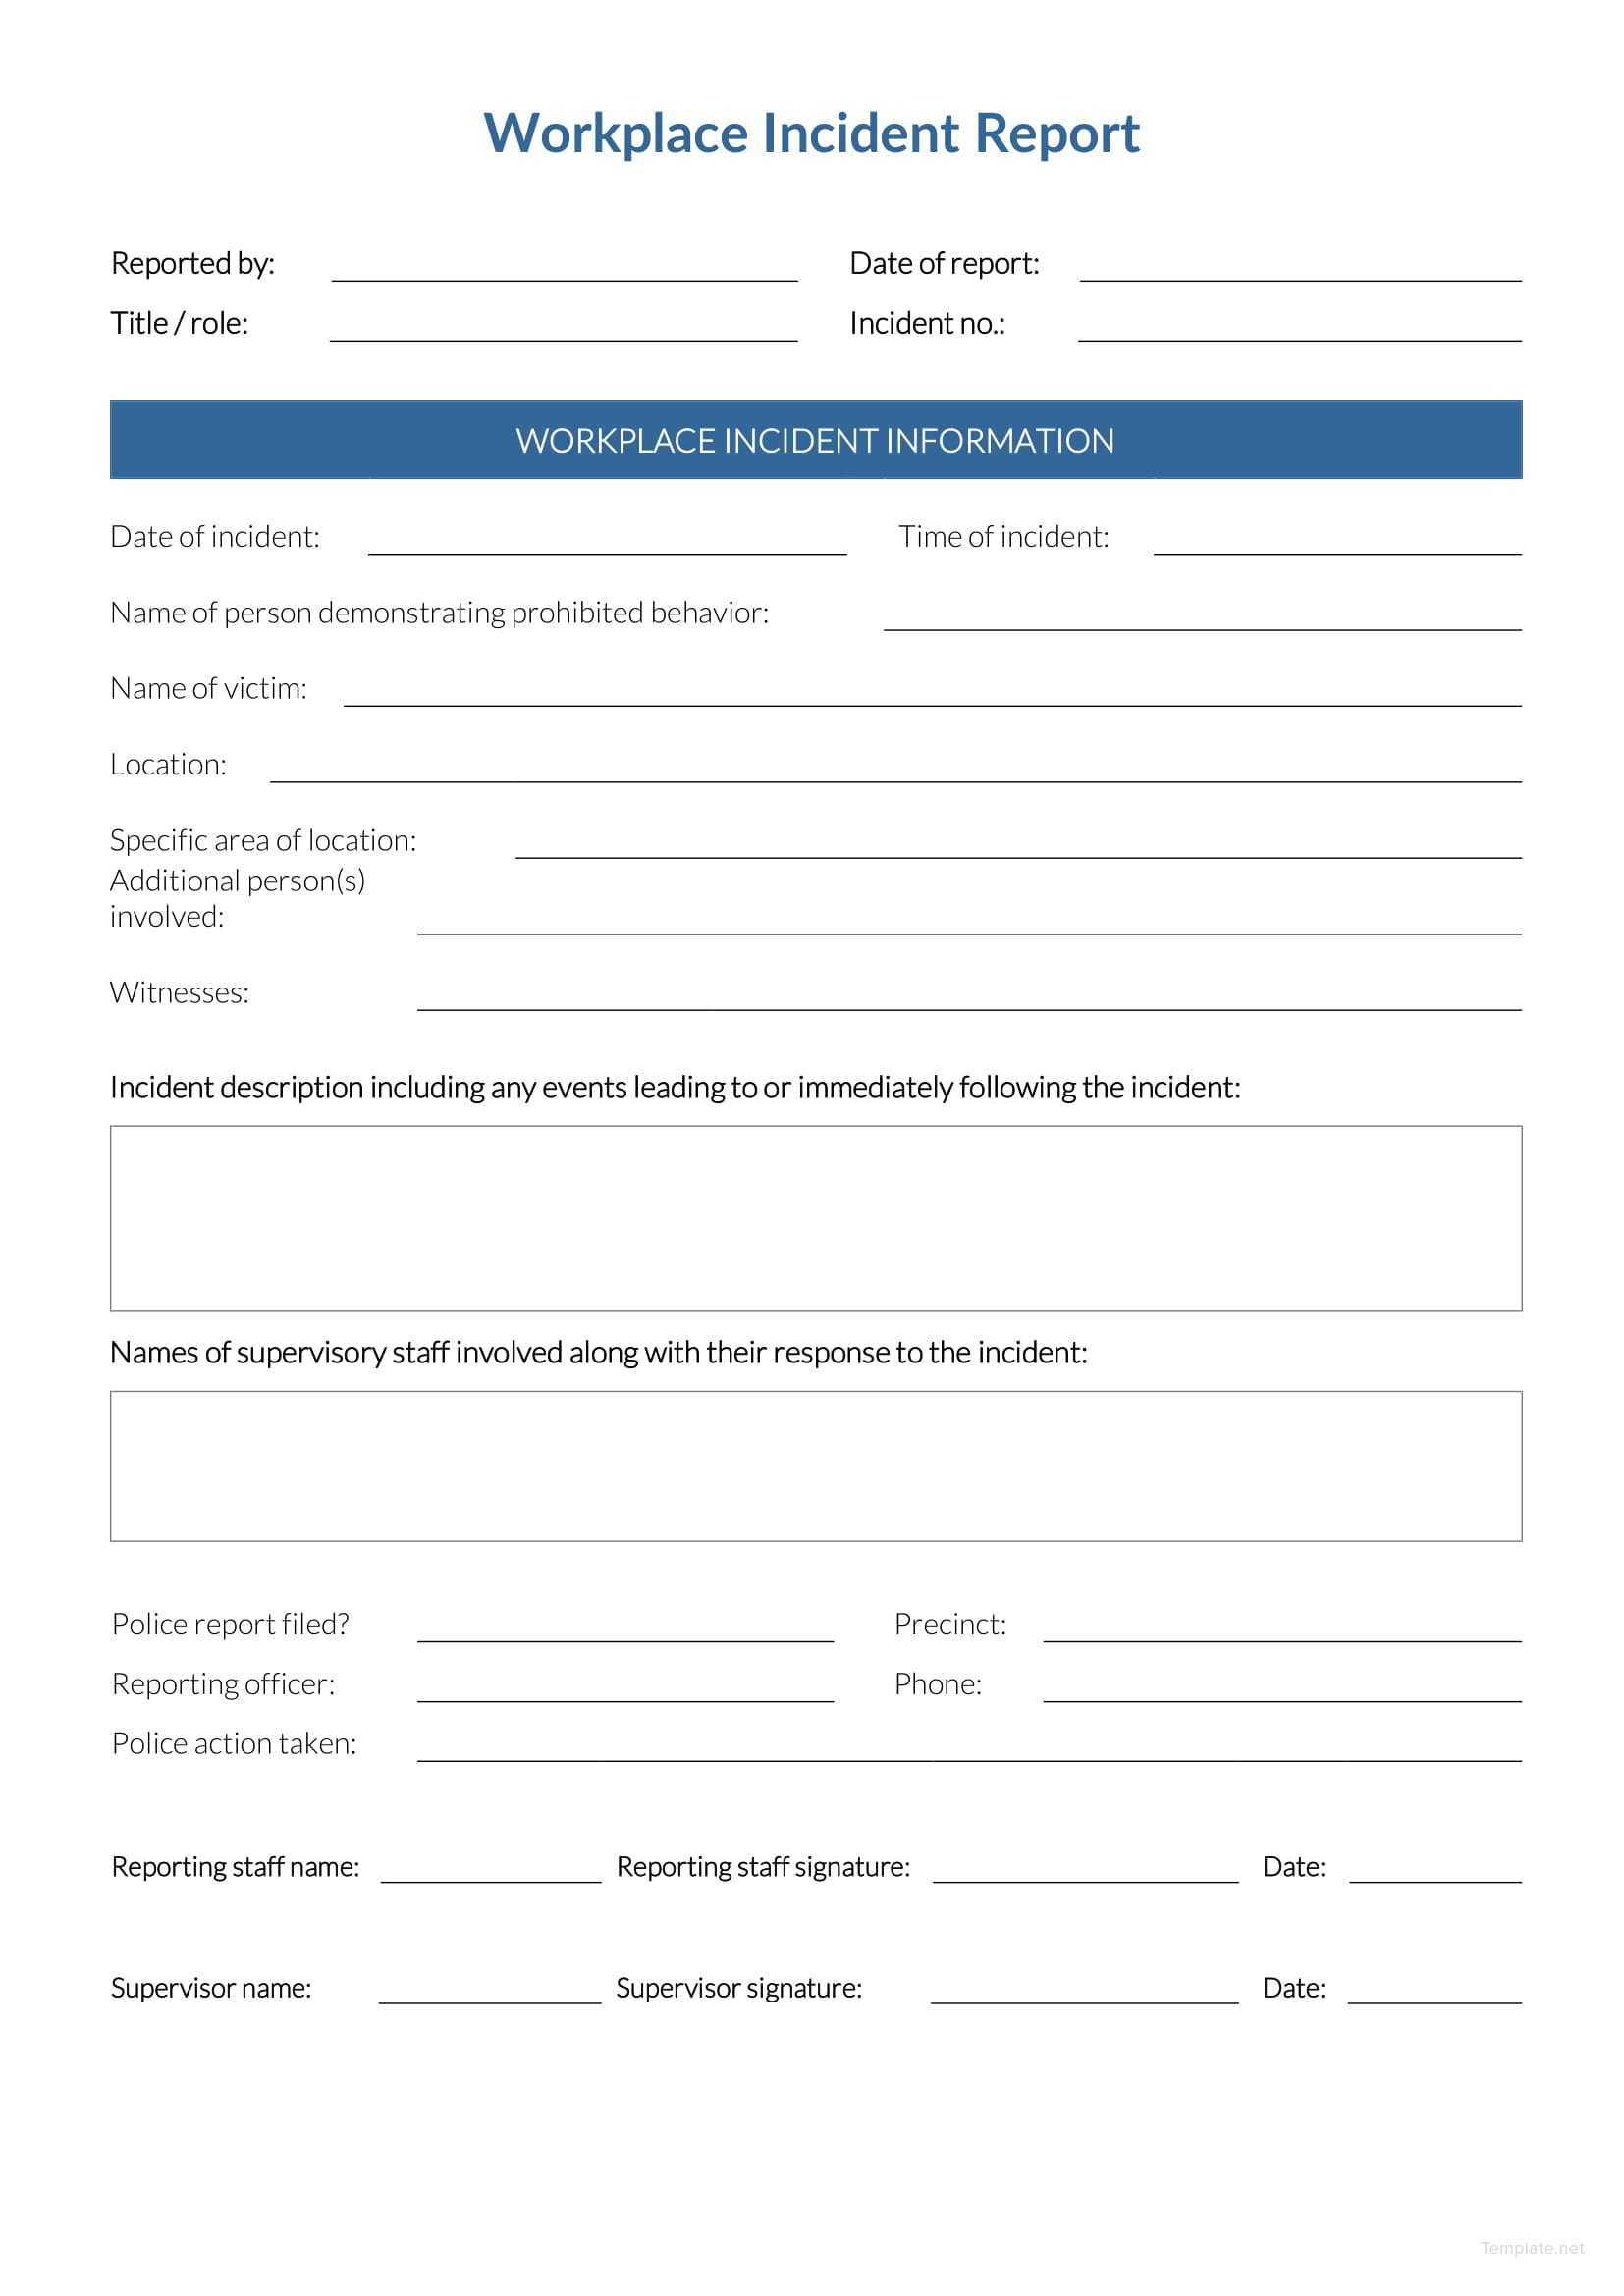 Free Workplace Incident Report | Incident Report, Workplace In Appointment Card Template Word